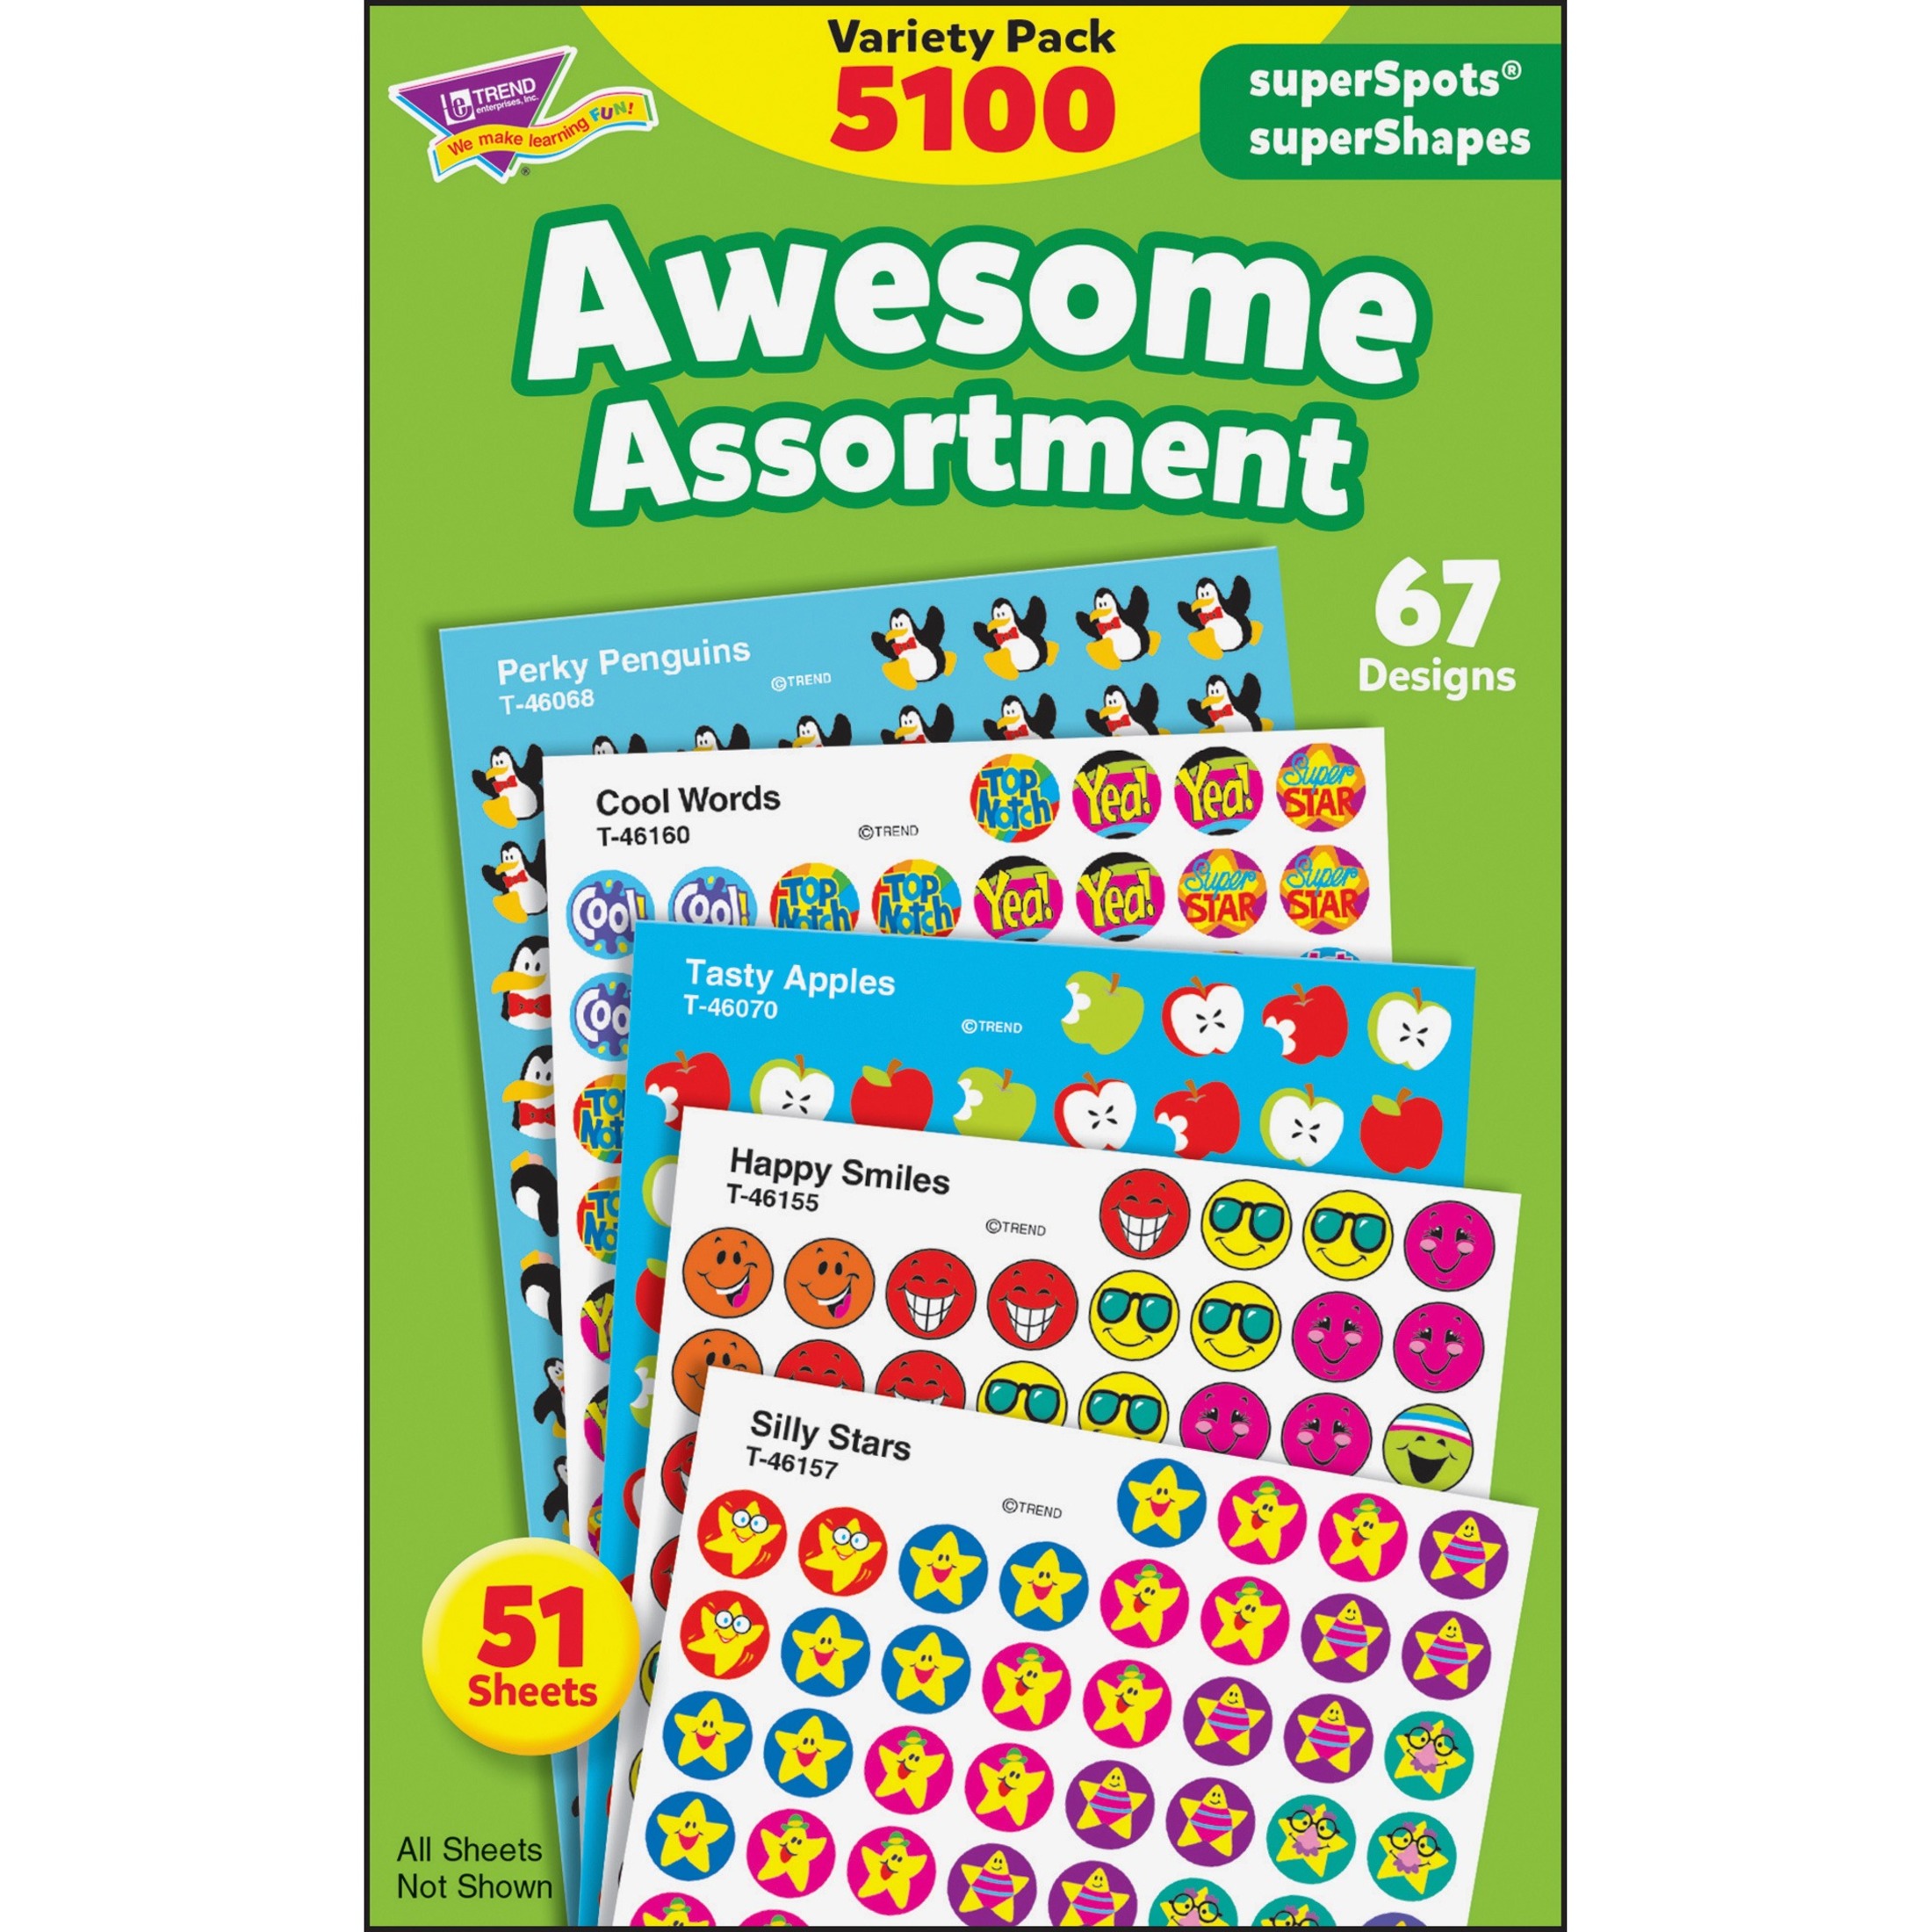 TREND Awesome Assortment superSpots/superShapes Variety Pack - 5100 ct - image 2 of 3